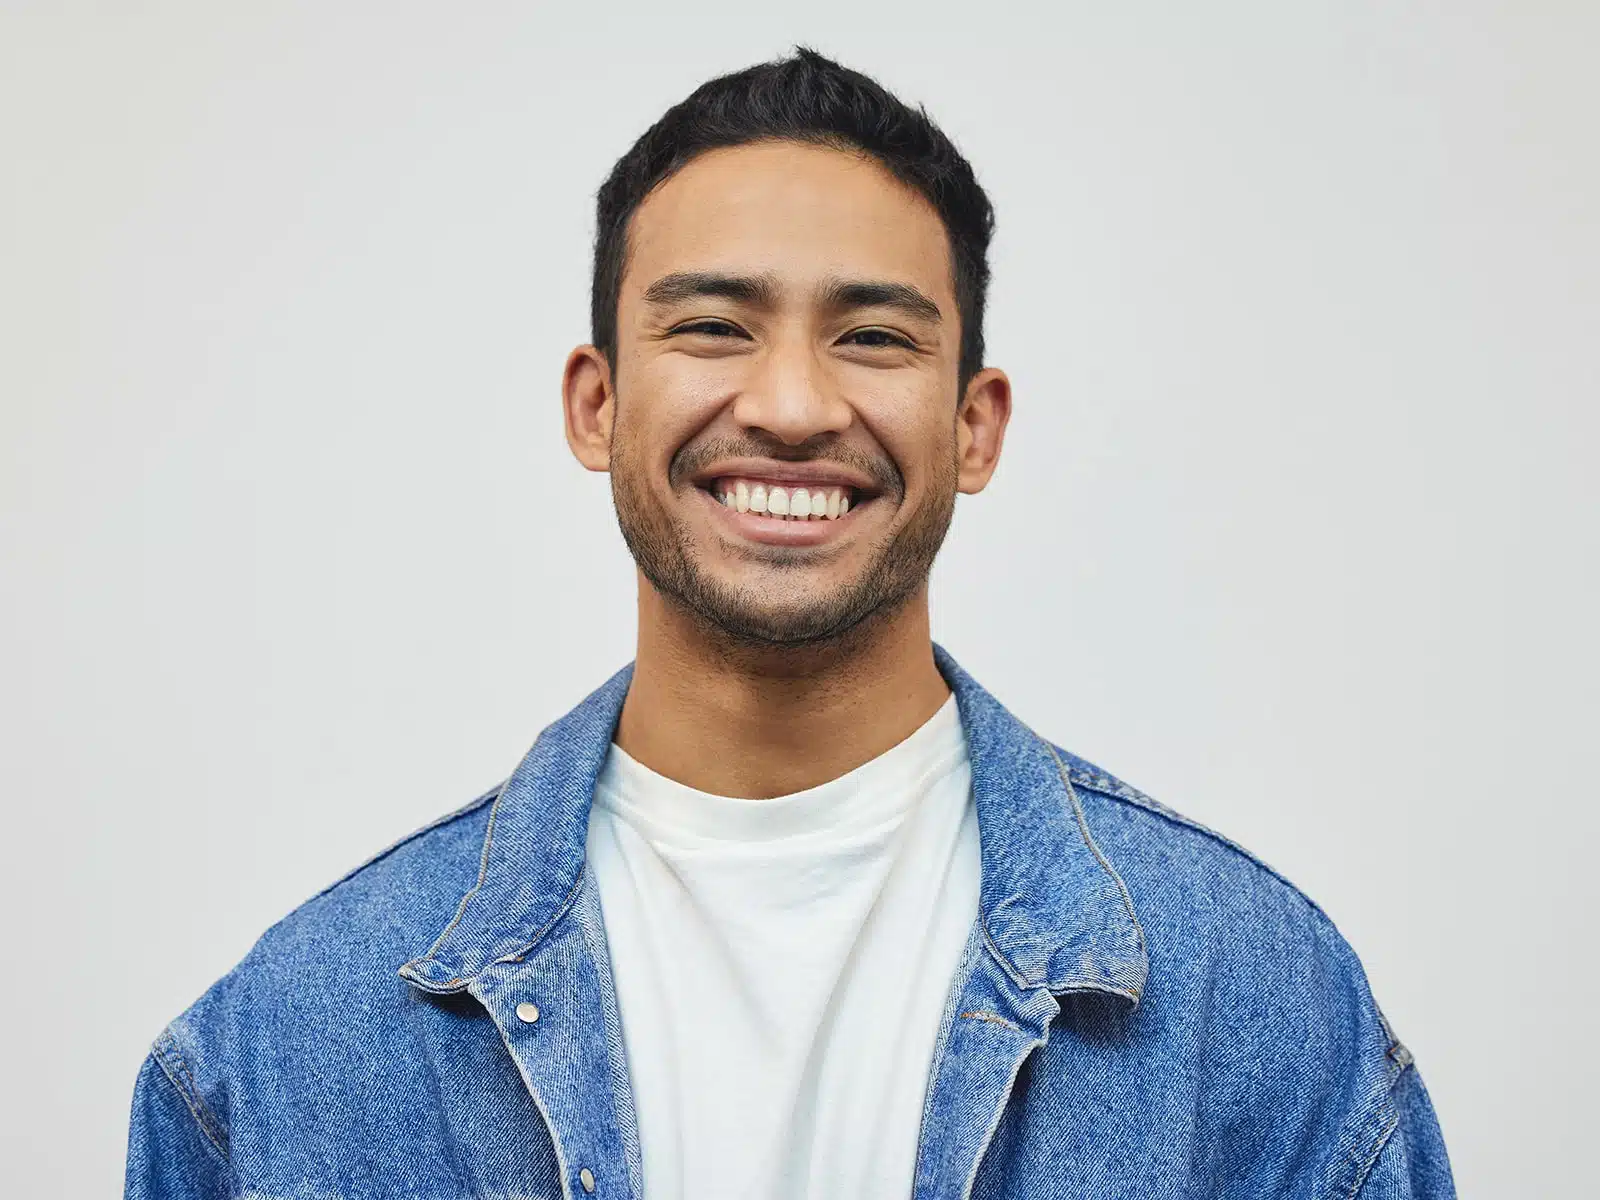 Young man smiling wearing a jean jacket